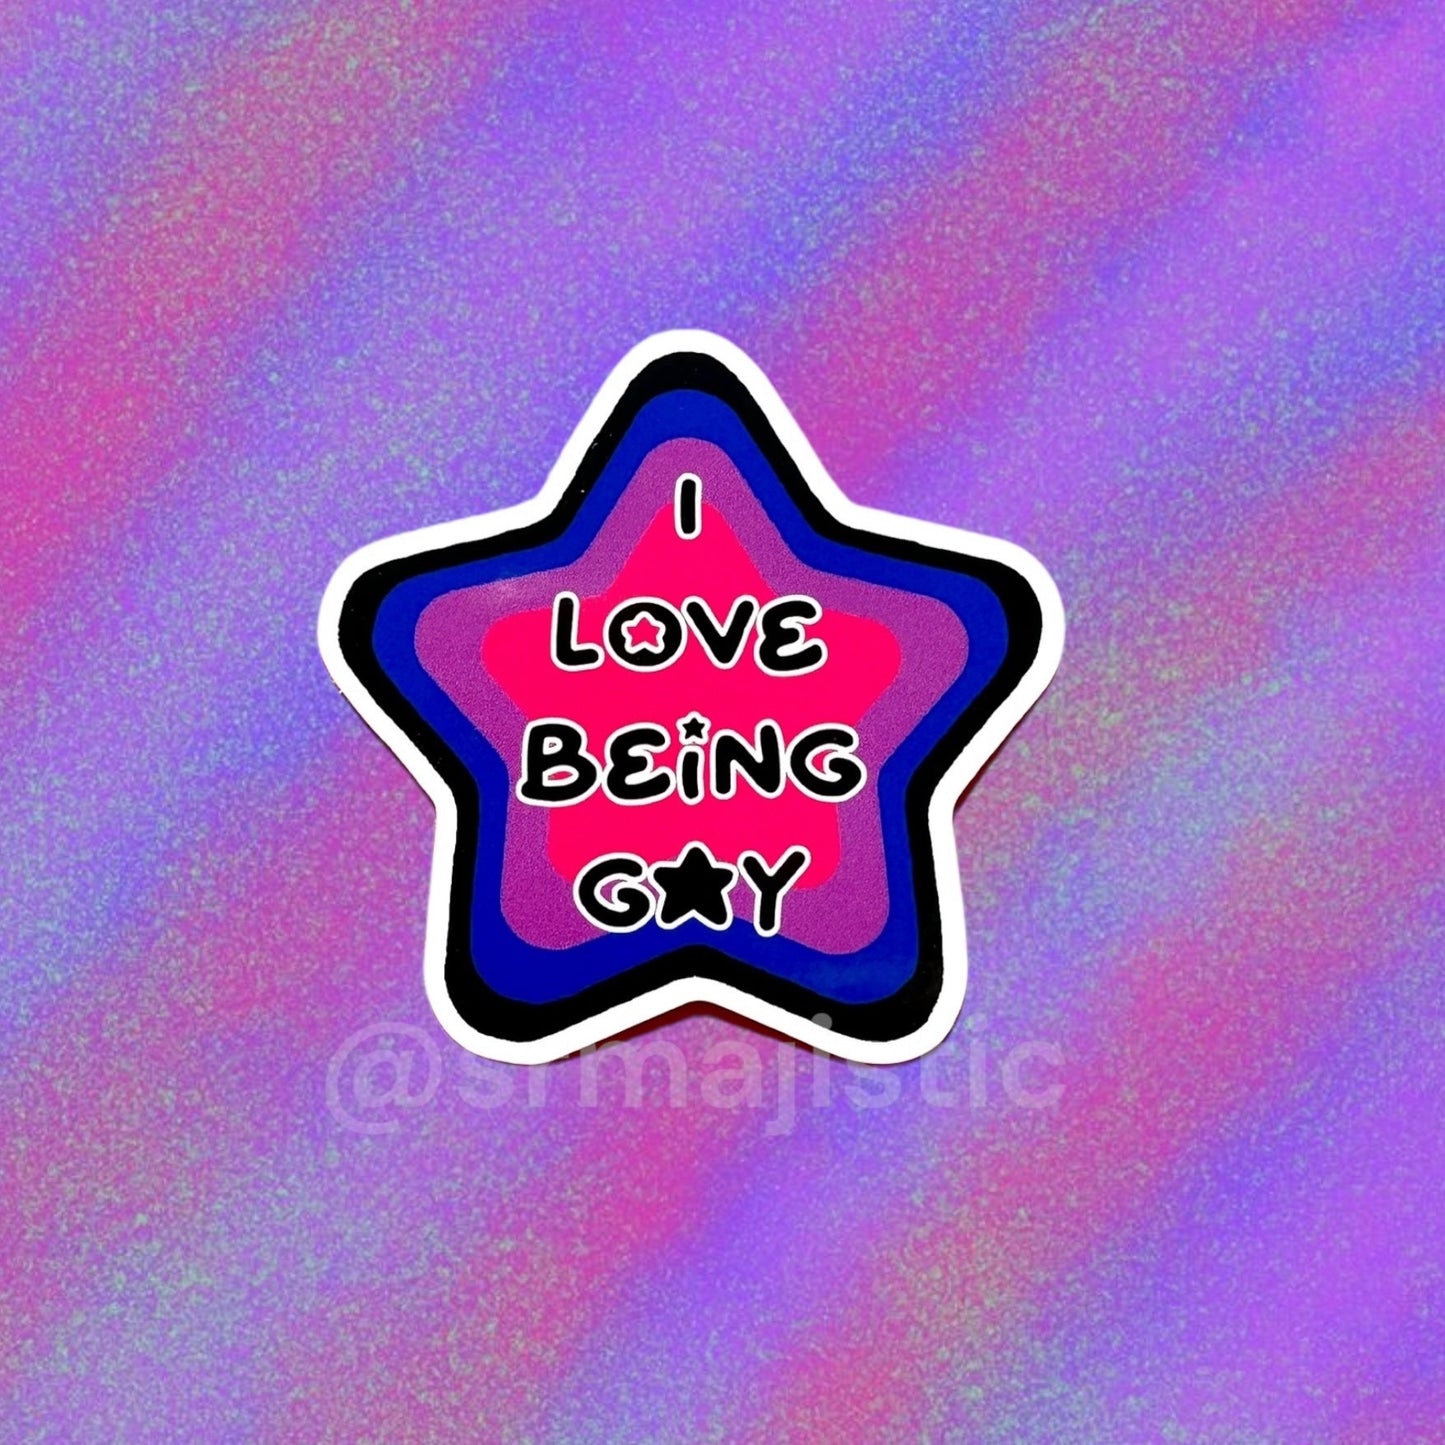 I Love Being Gay Various Pride Star Bumper Stickers!